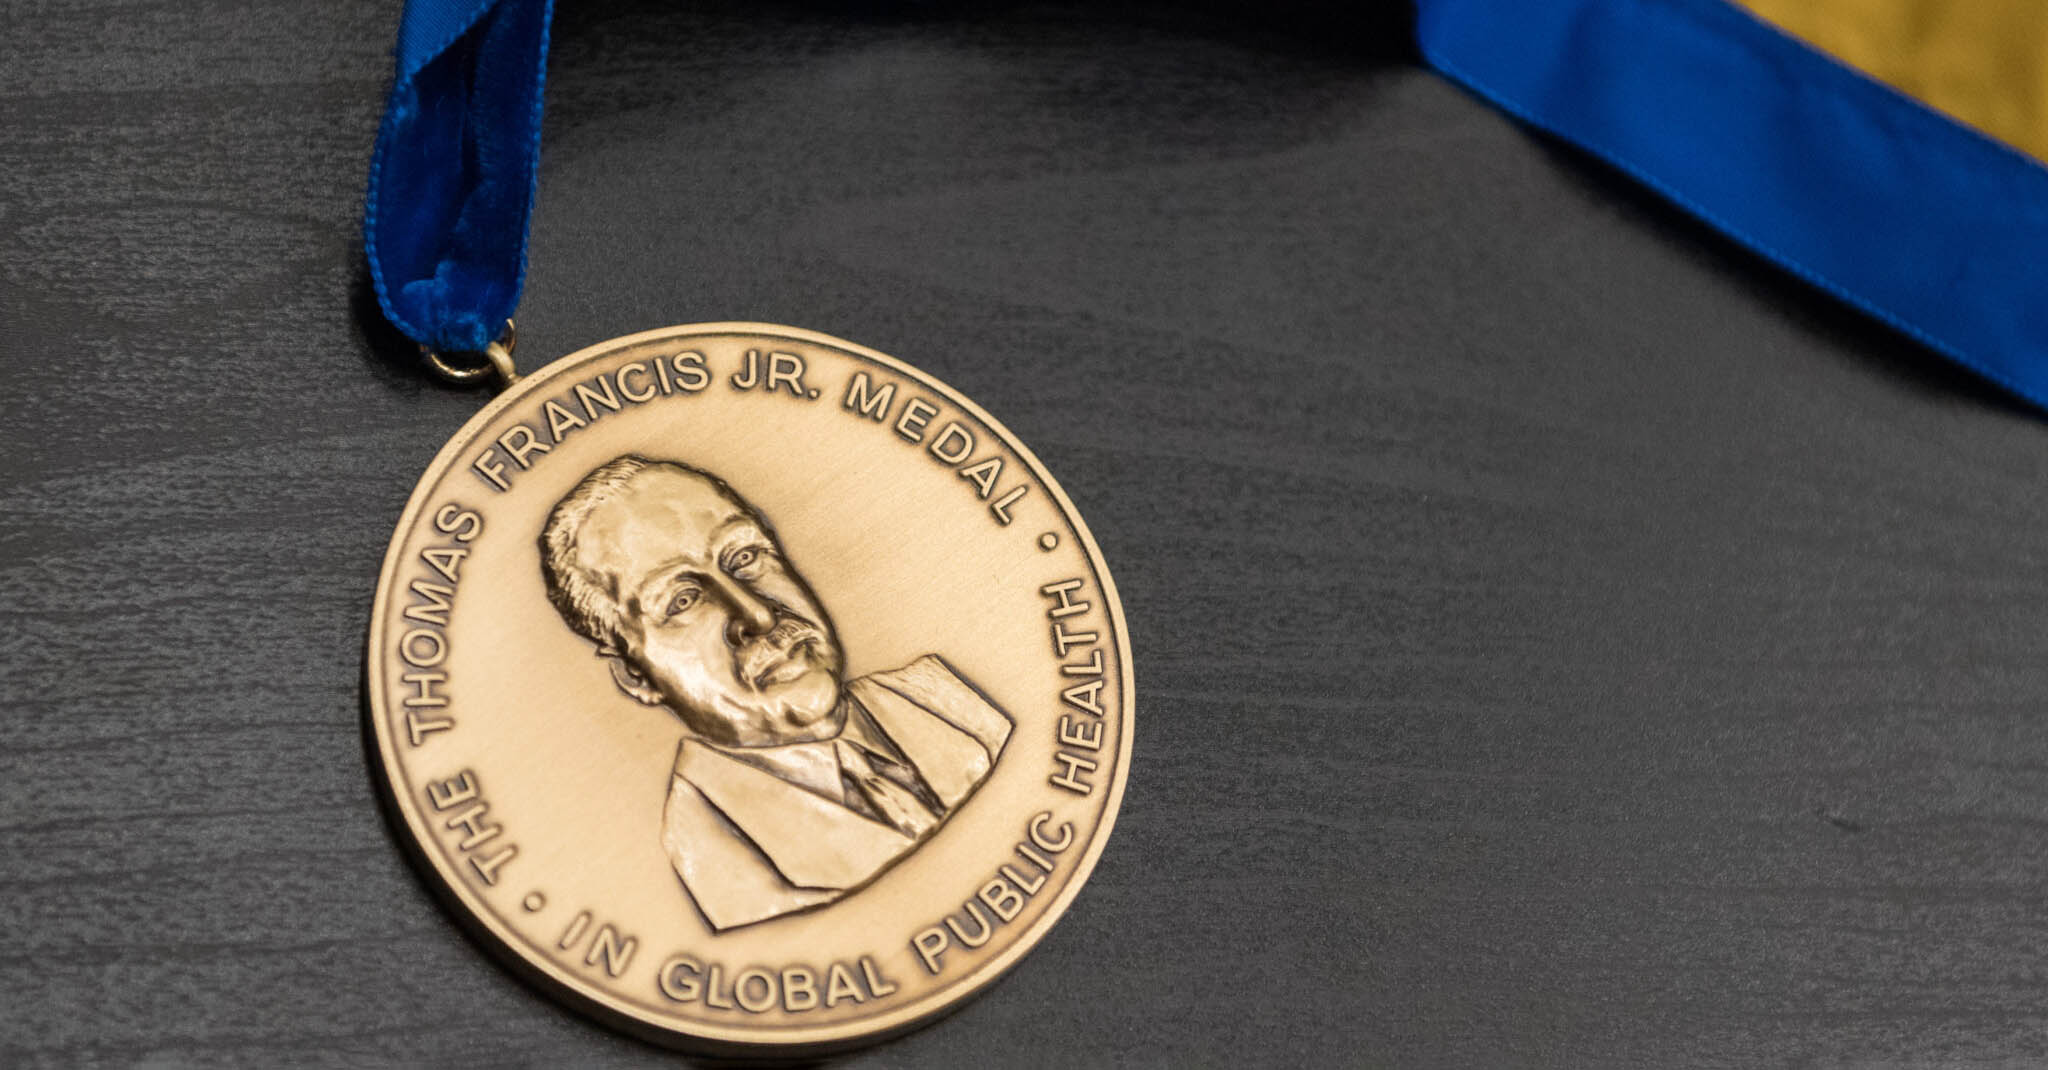 WHO director general to receive Thomas Francis Jr. Medal